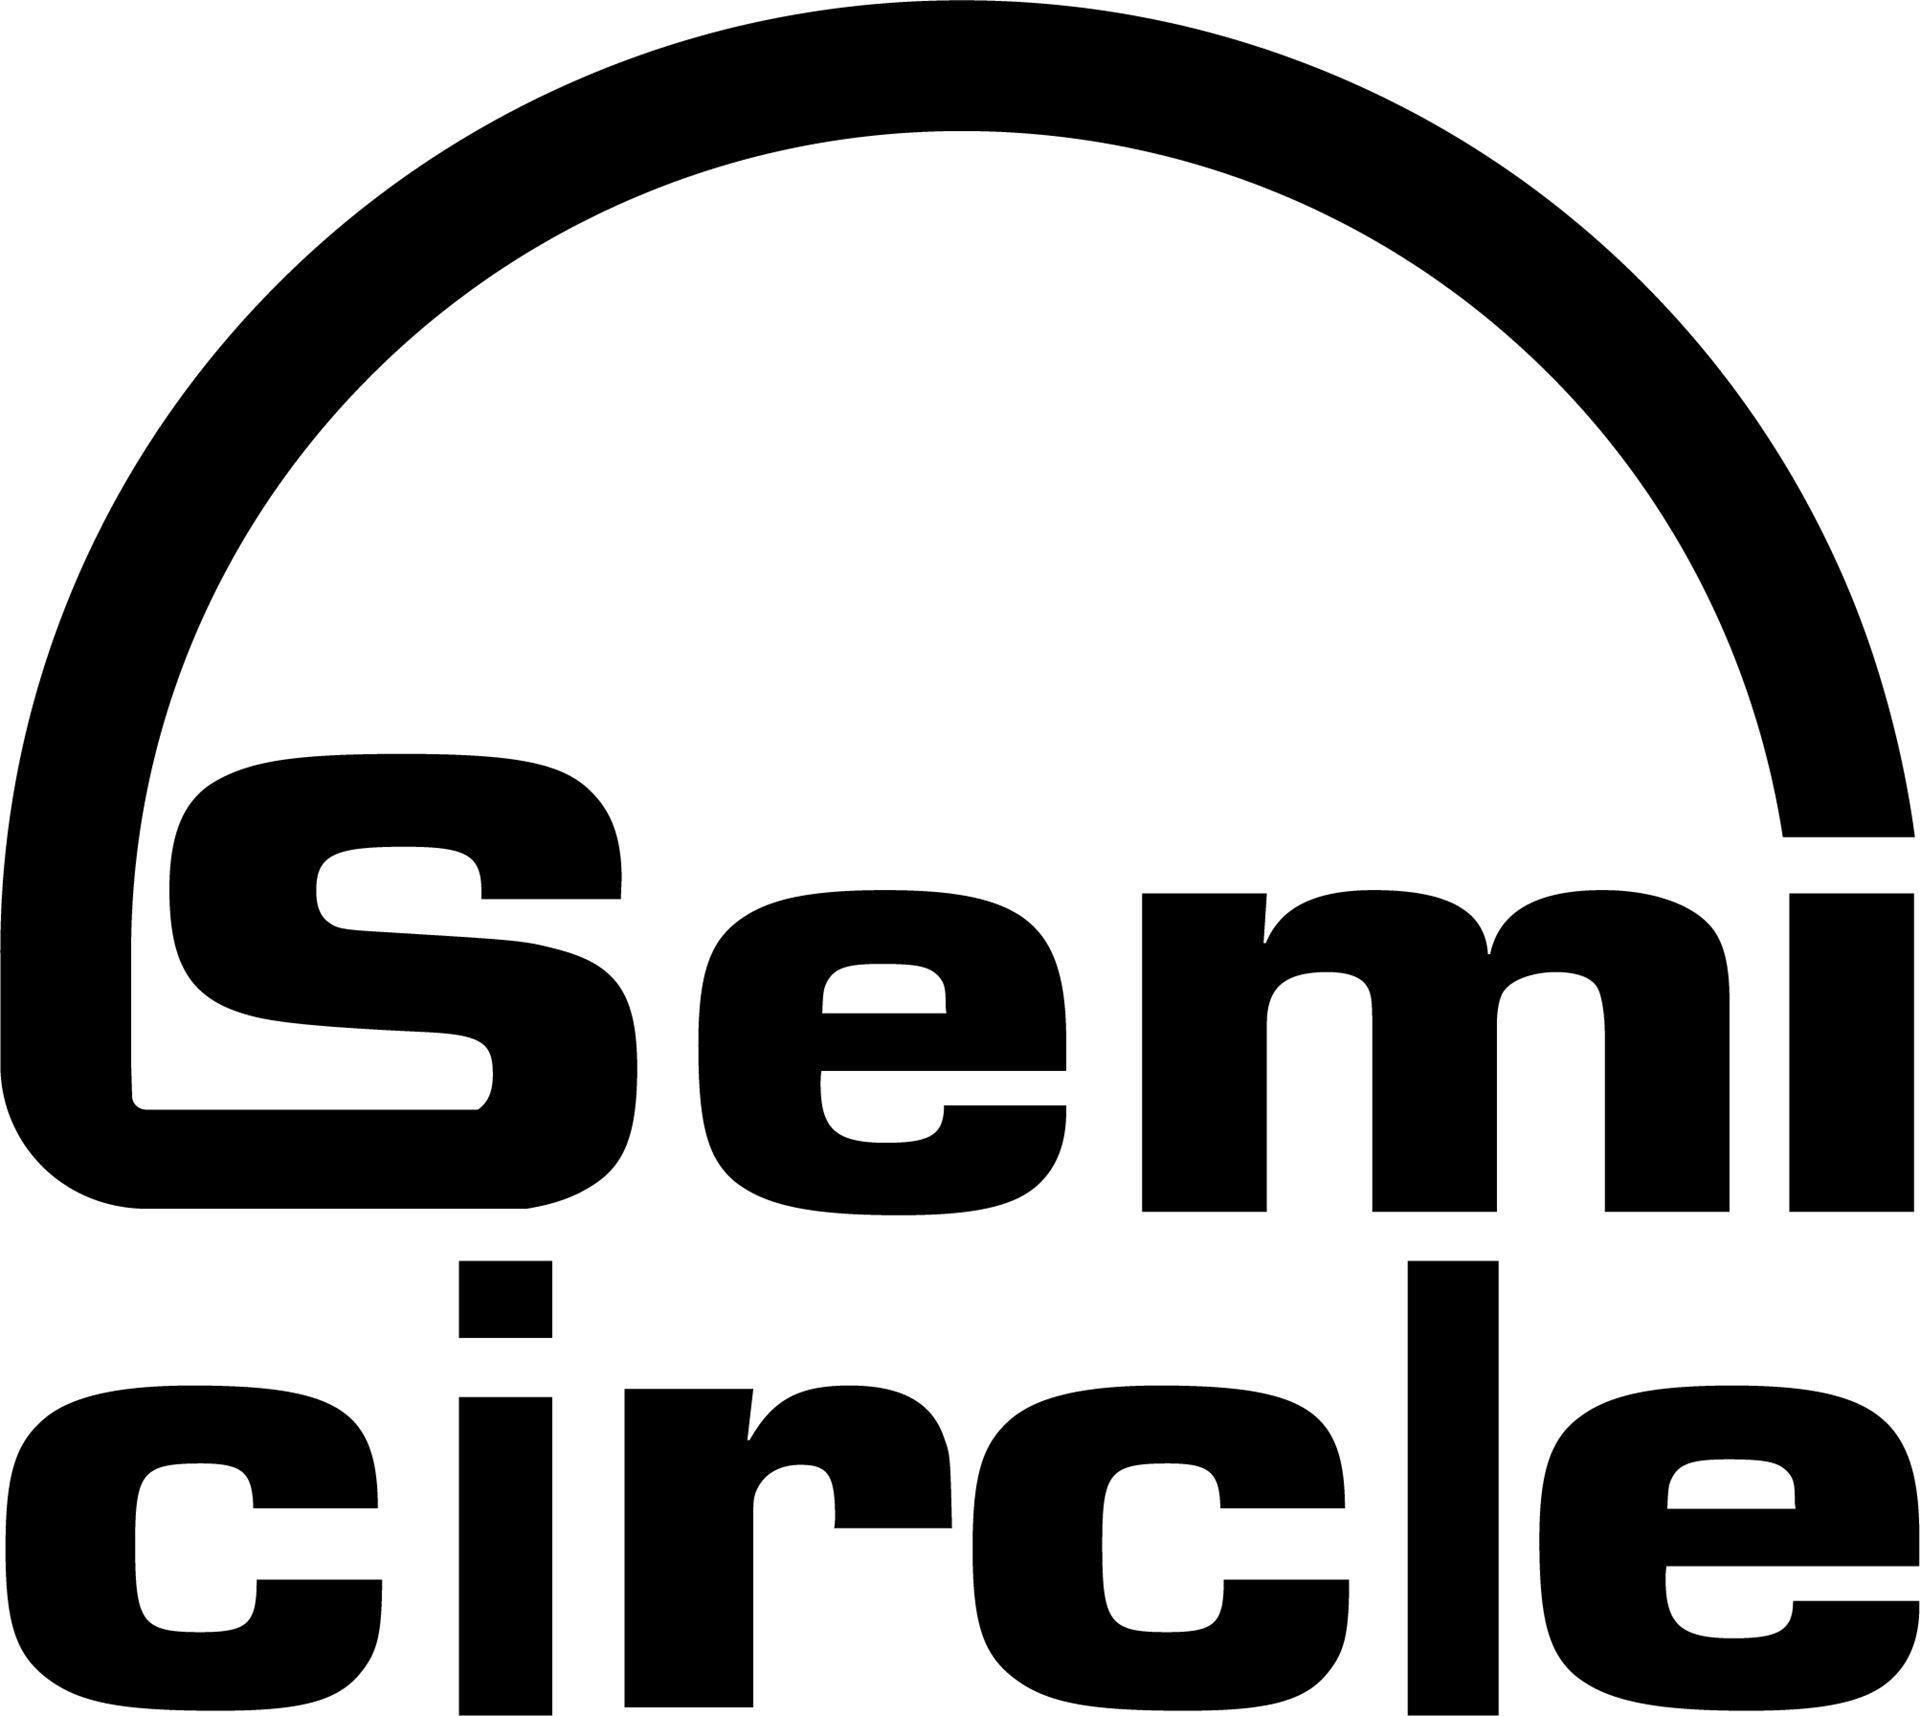 Semicircle with Black and White Logo - The Semi-Circle Basel - Home